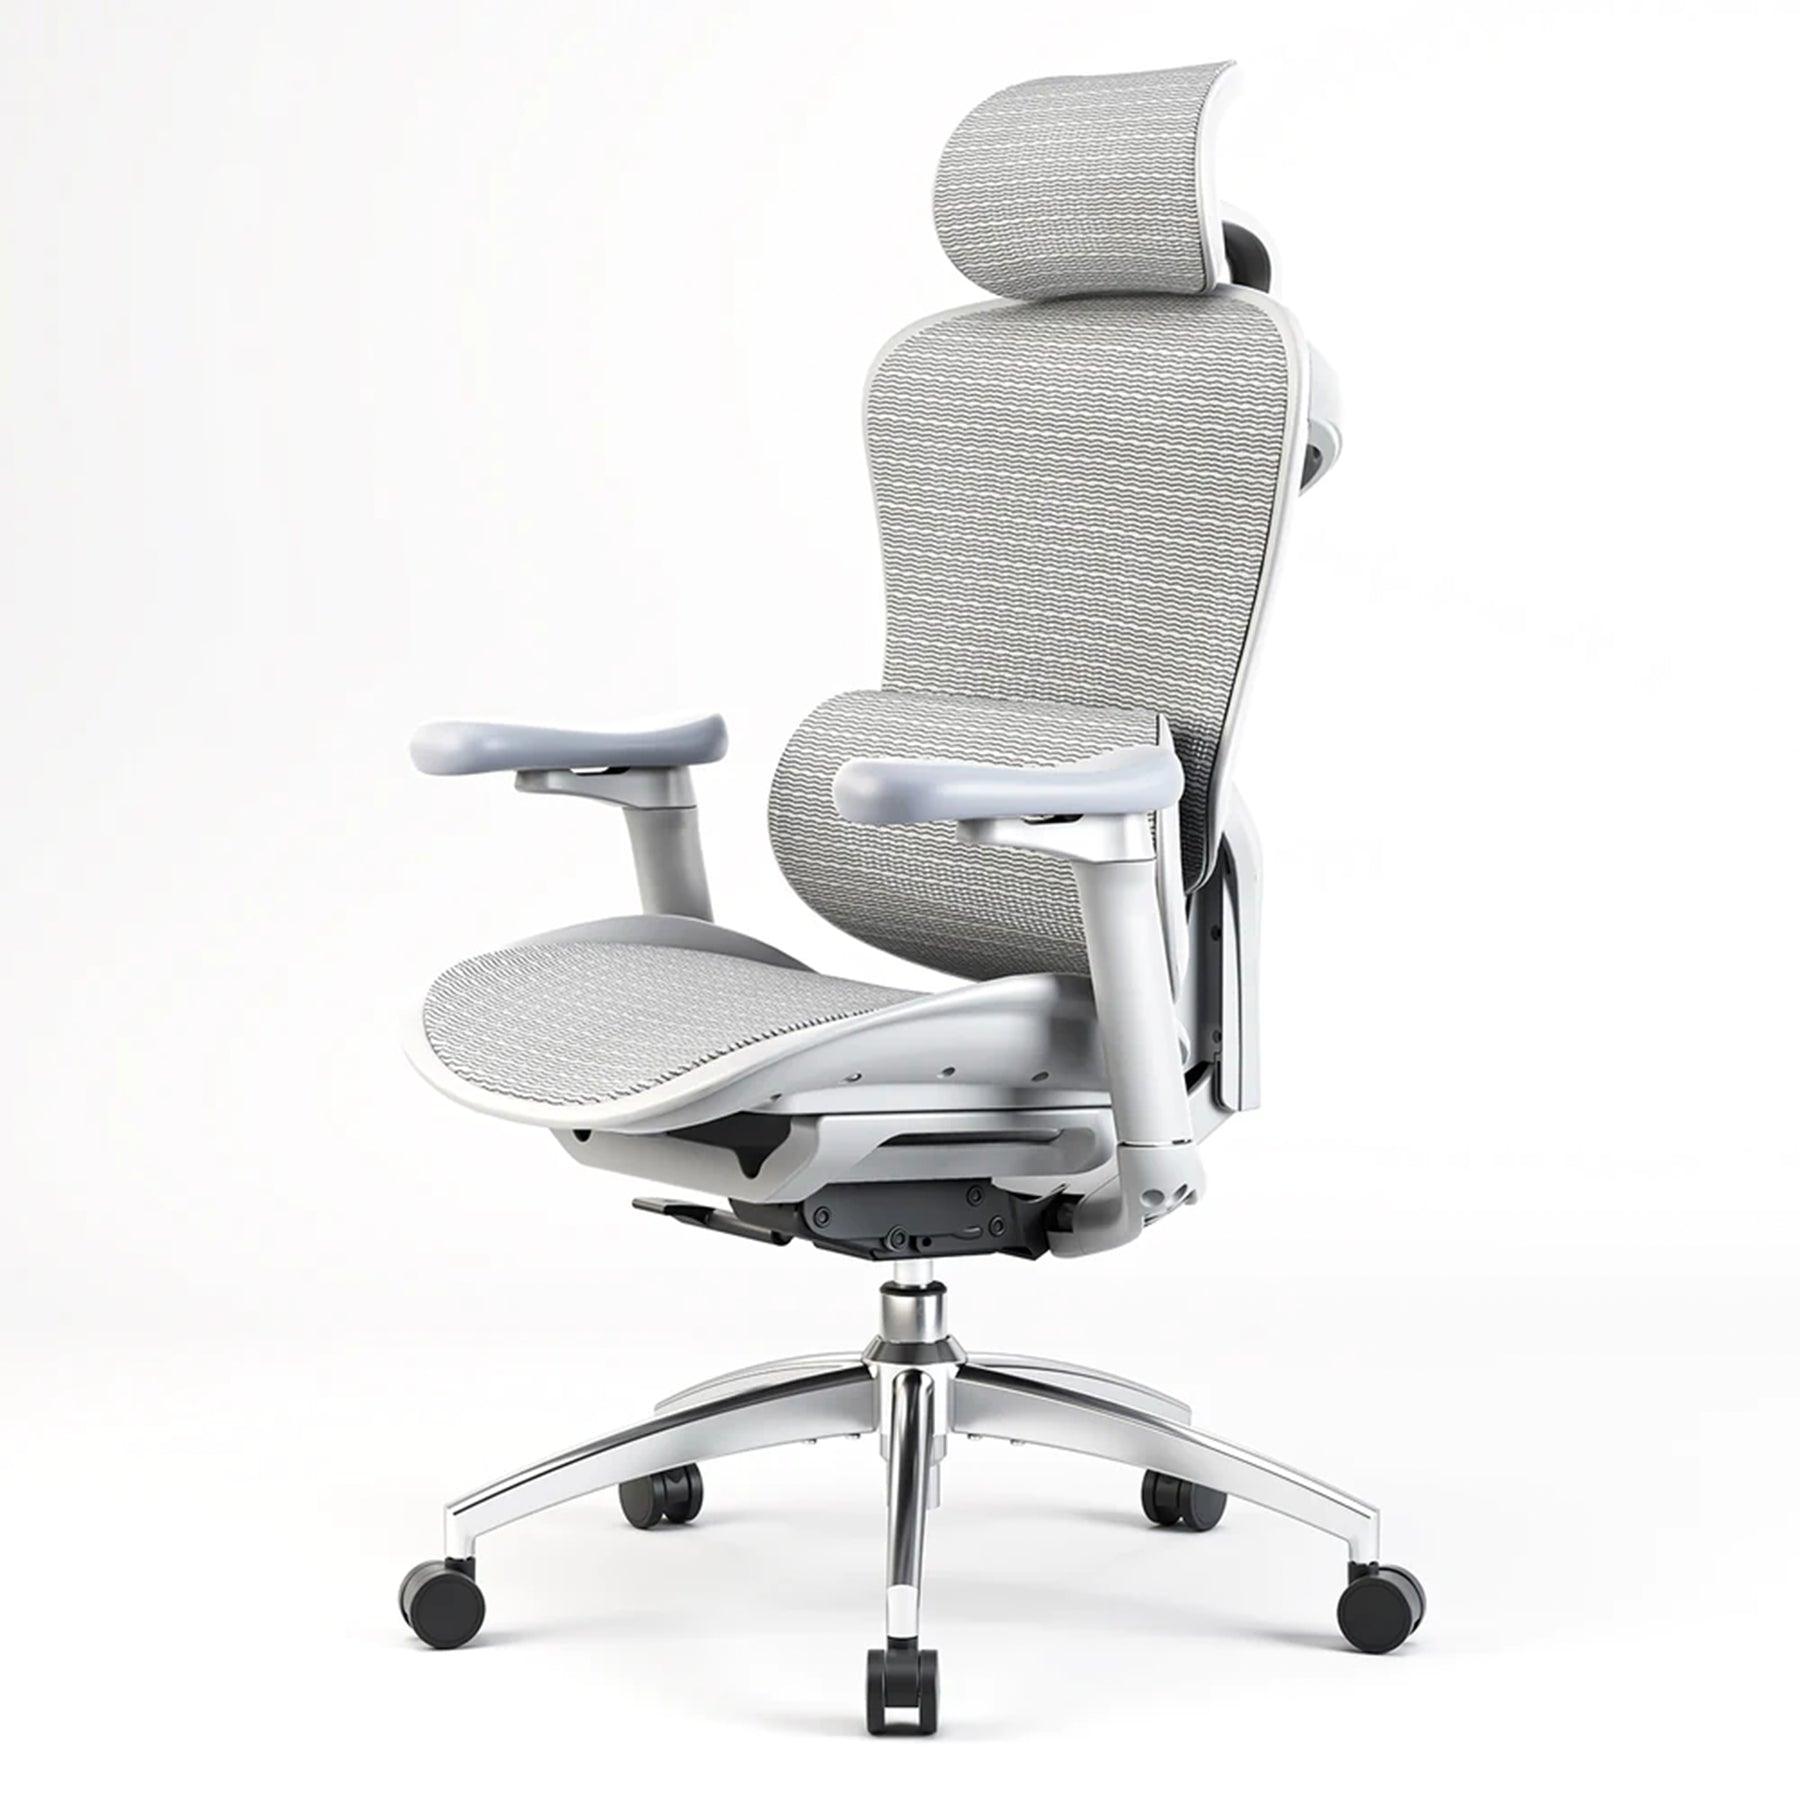 Sihoo's Doro-C300 Office Chair Is An Affordable Alternative To